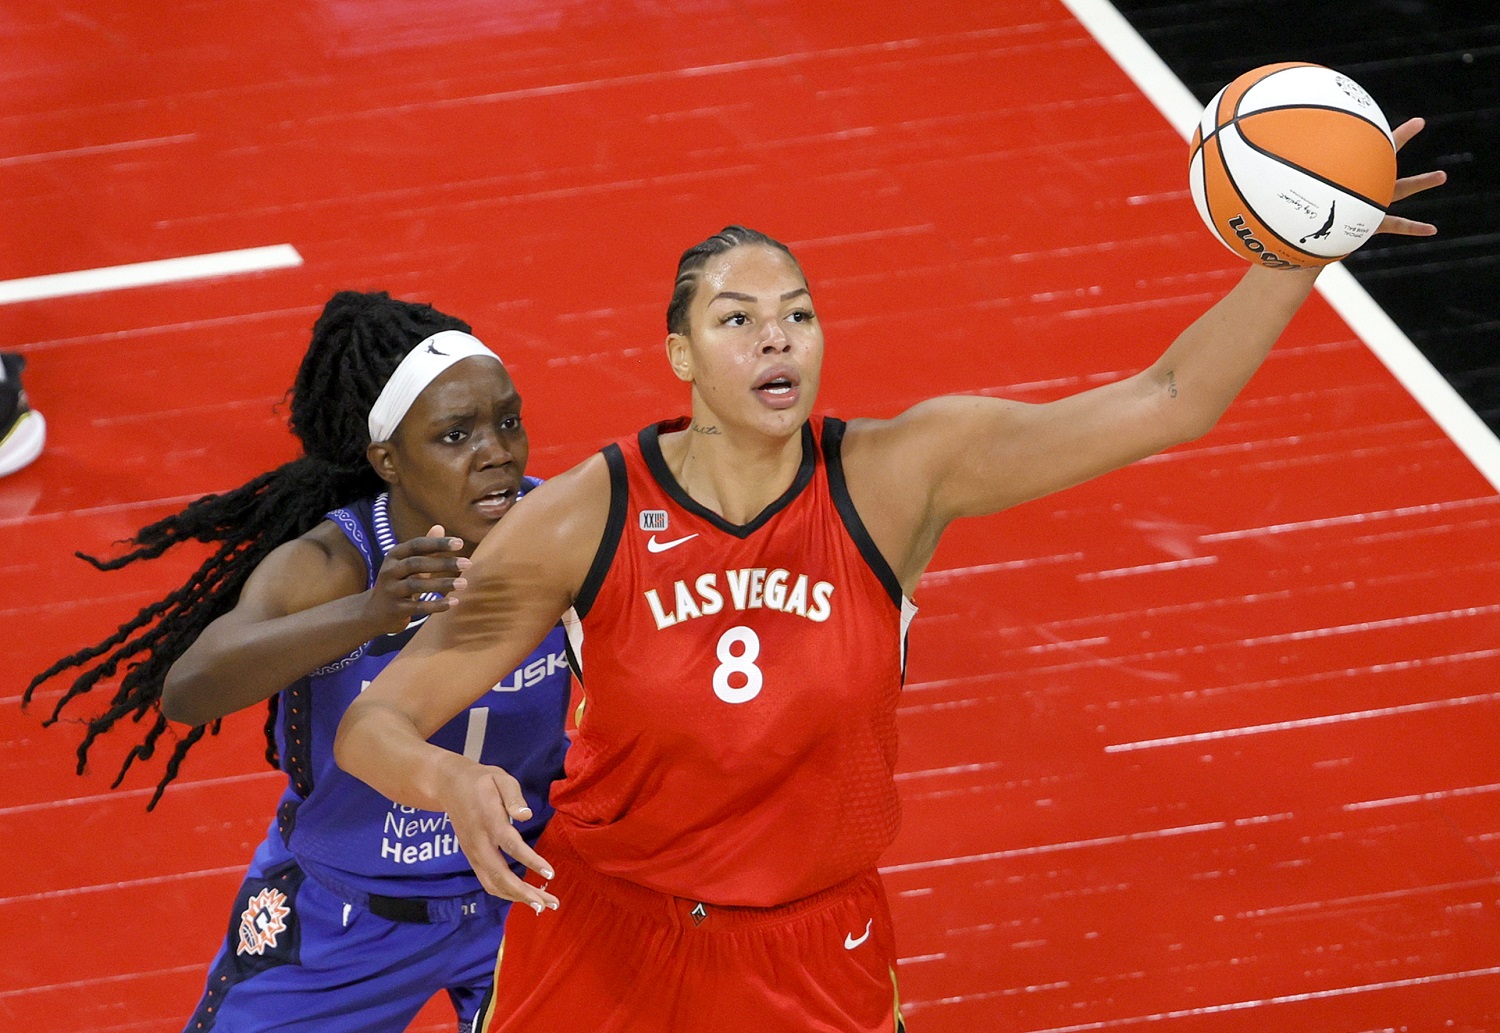 Liz Cambage of the Las Vegas Aces catches a pass under pressure from Beatrice Mompremier of the Connecticut Sun during their game May 23, 2021 in Las Vegas.